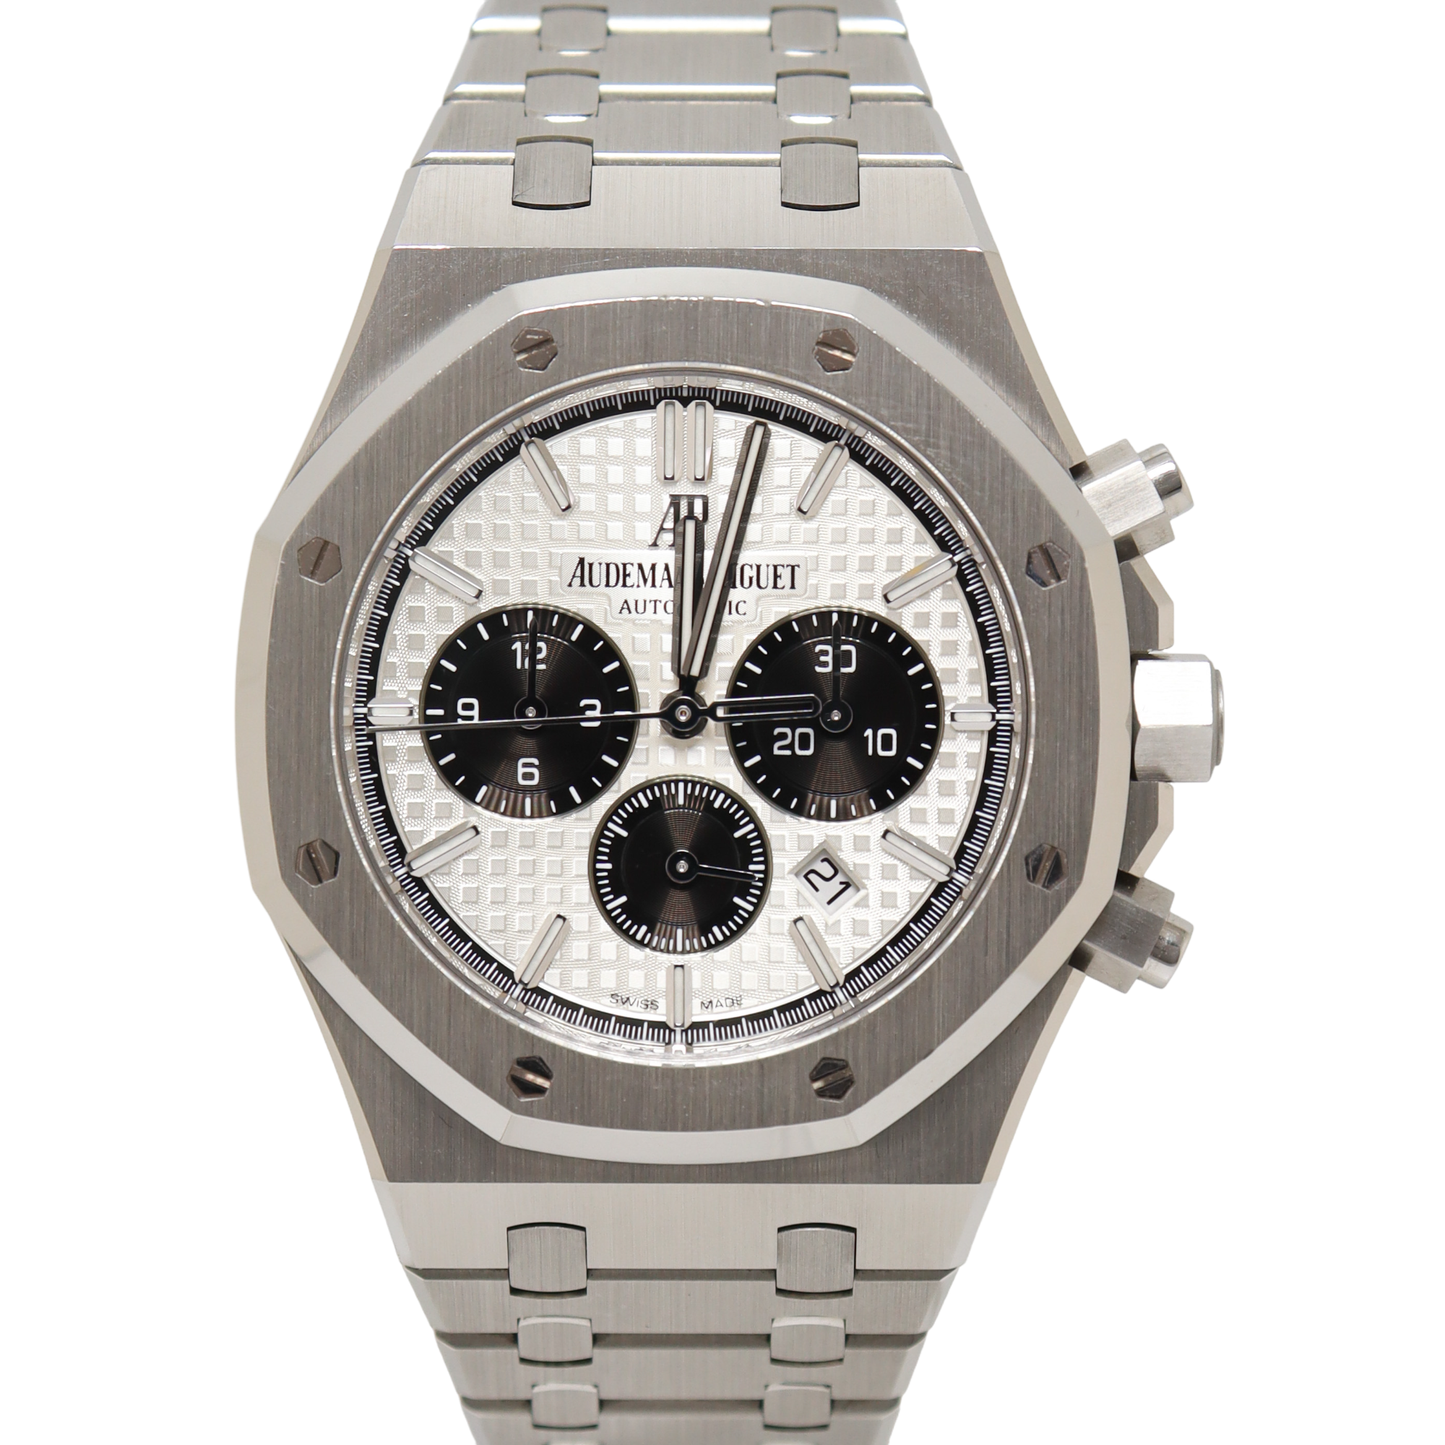 Audemars Piguet Royal Oak Stainless Steel 41mm White Chronograph Dial Watch Reference#: 26331ST.OO.1220ST.03 - Happy Jewelers Fine Jewelry Lifetime Warranty